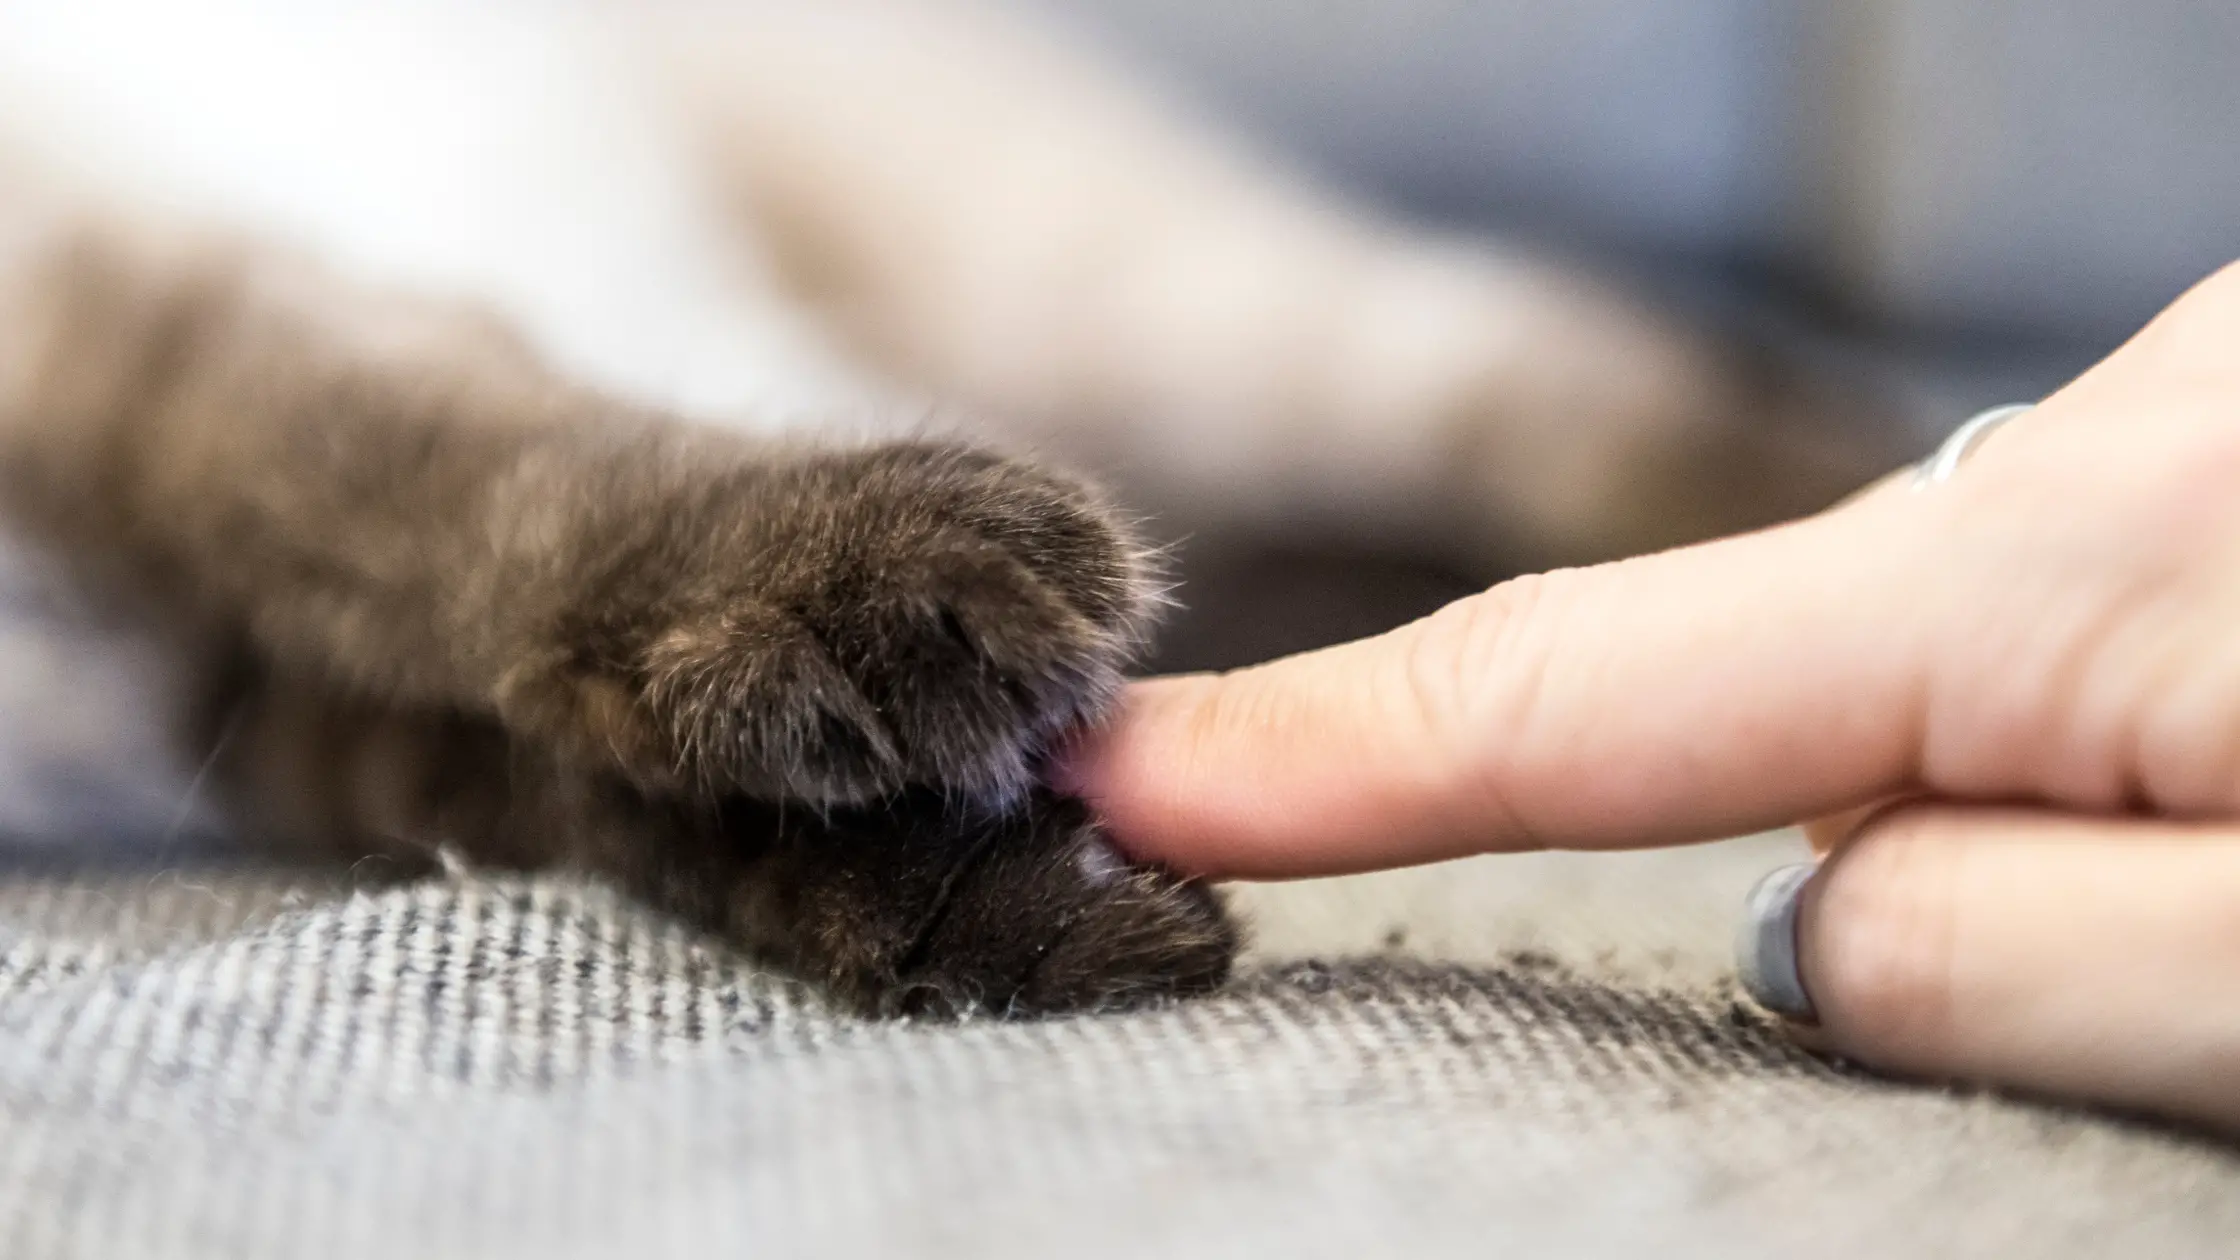 WHAT CAN I DO INSTEAD OF DECLAWING A CAT?